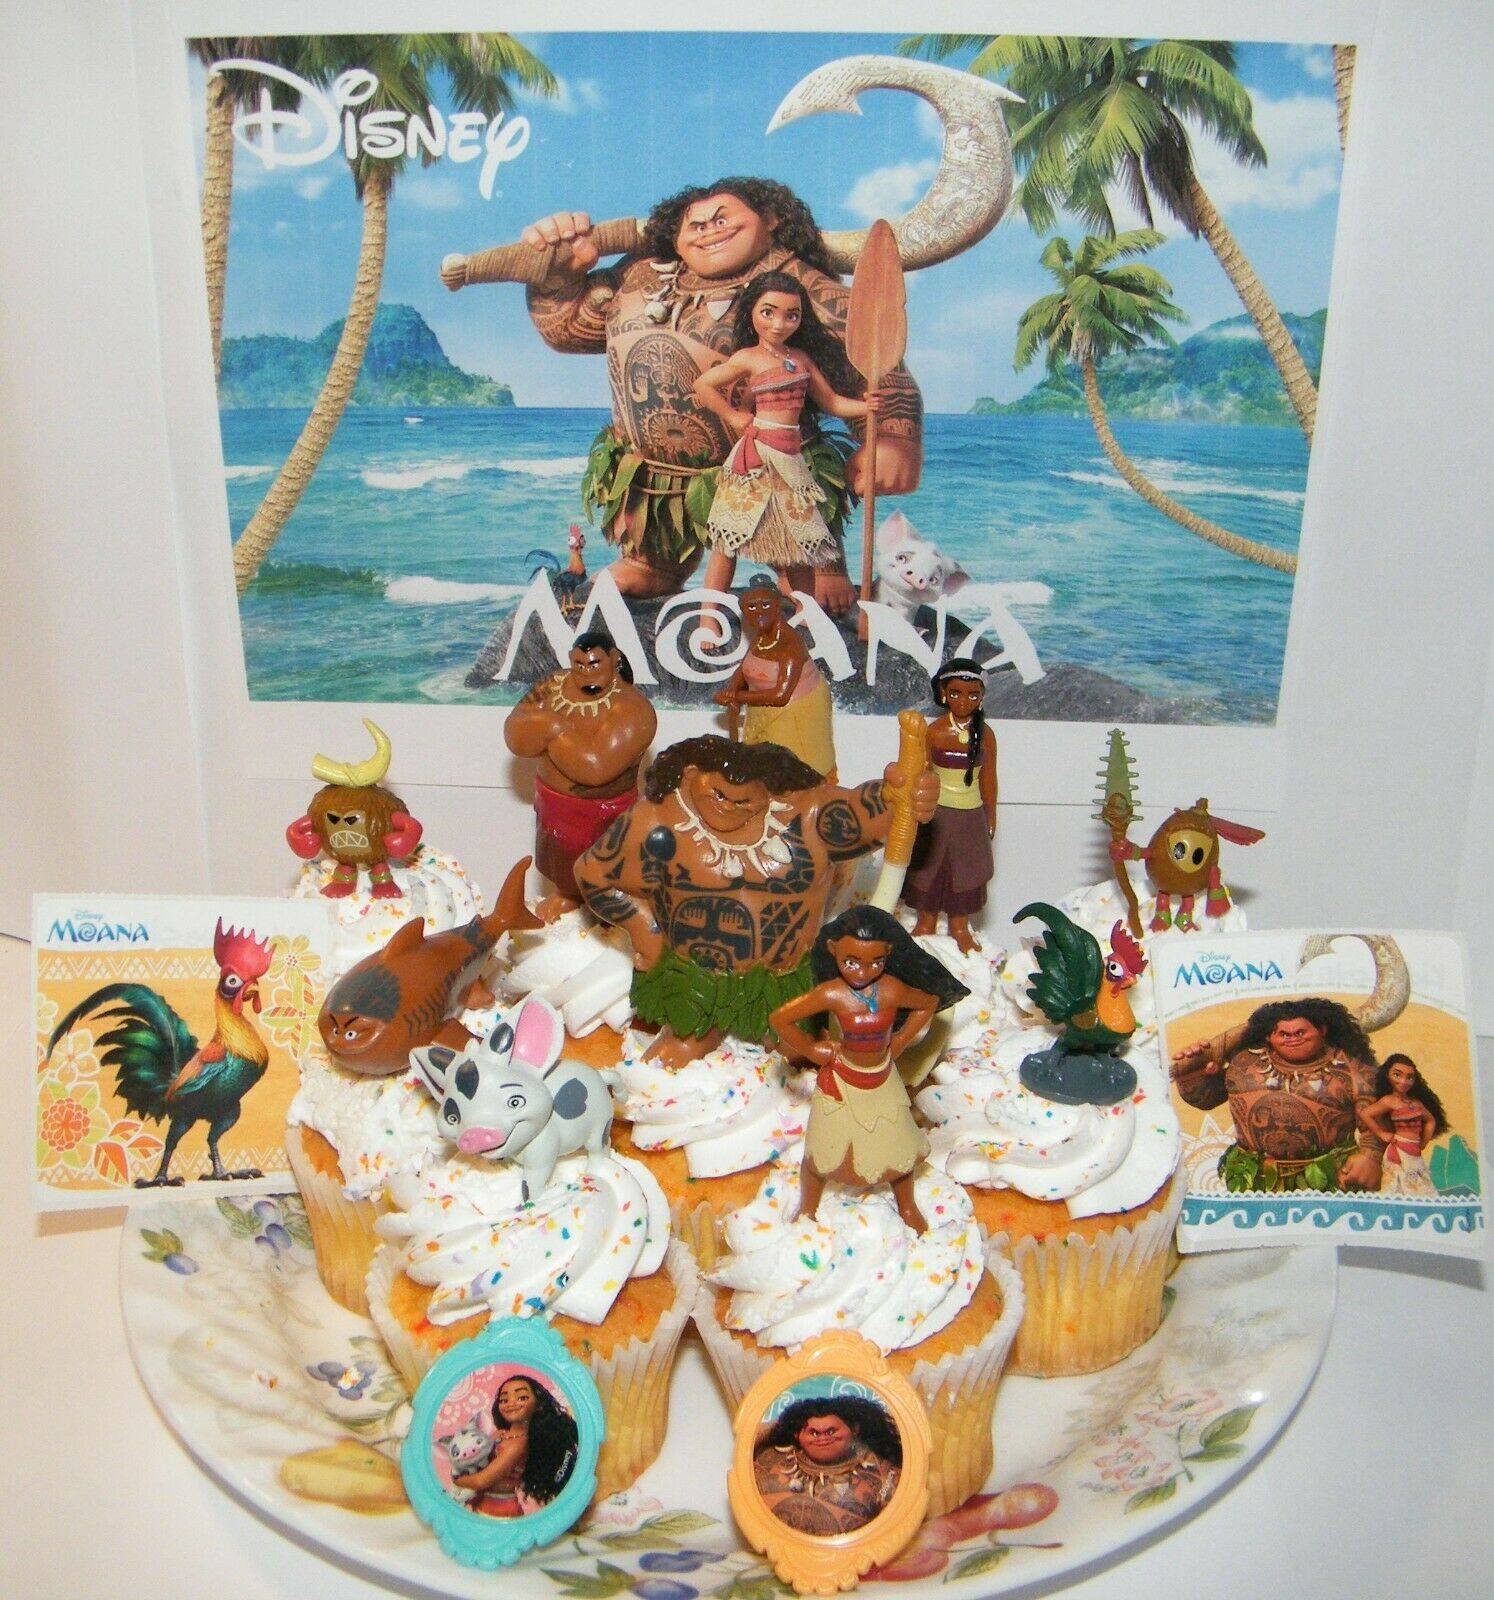 Disney Moana Movie Cake Toppers Set Of 14 With 10 Figures, 2 Rings And 2stickers